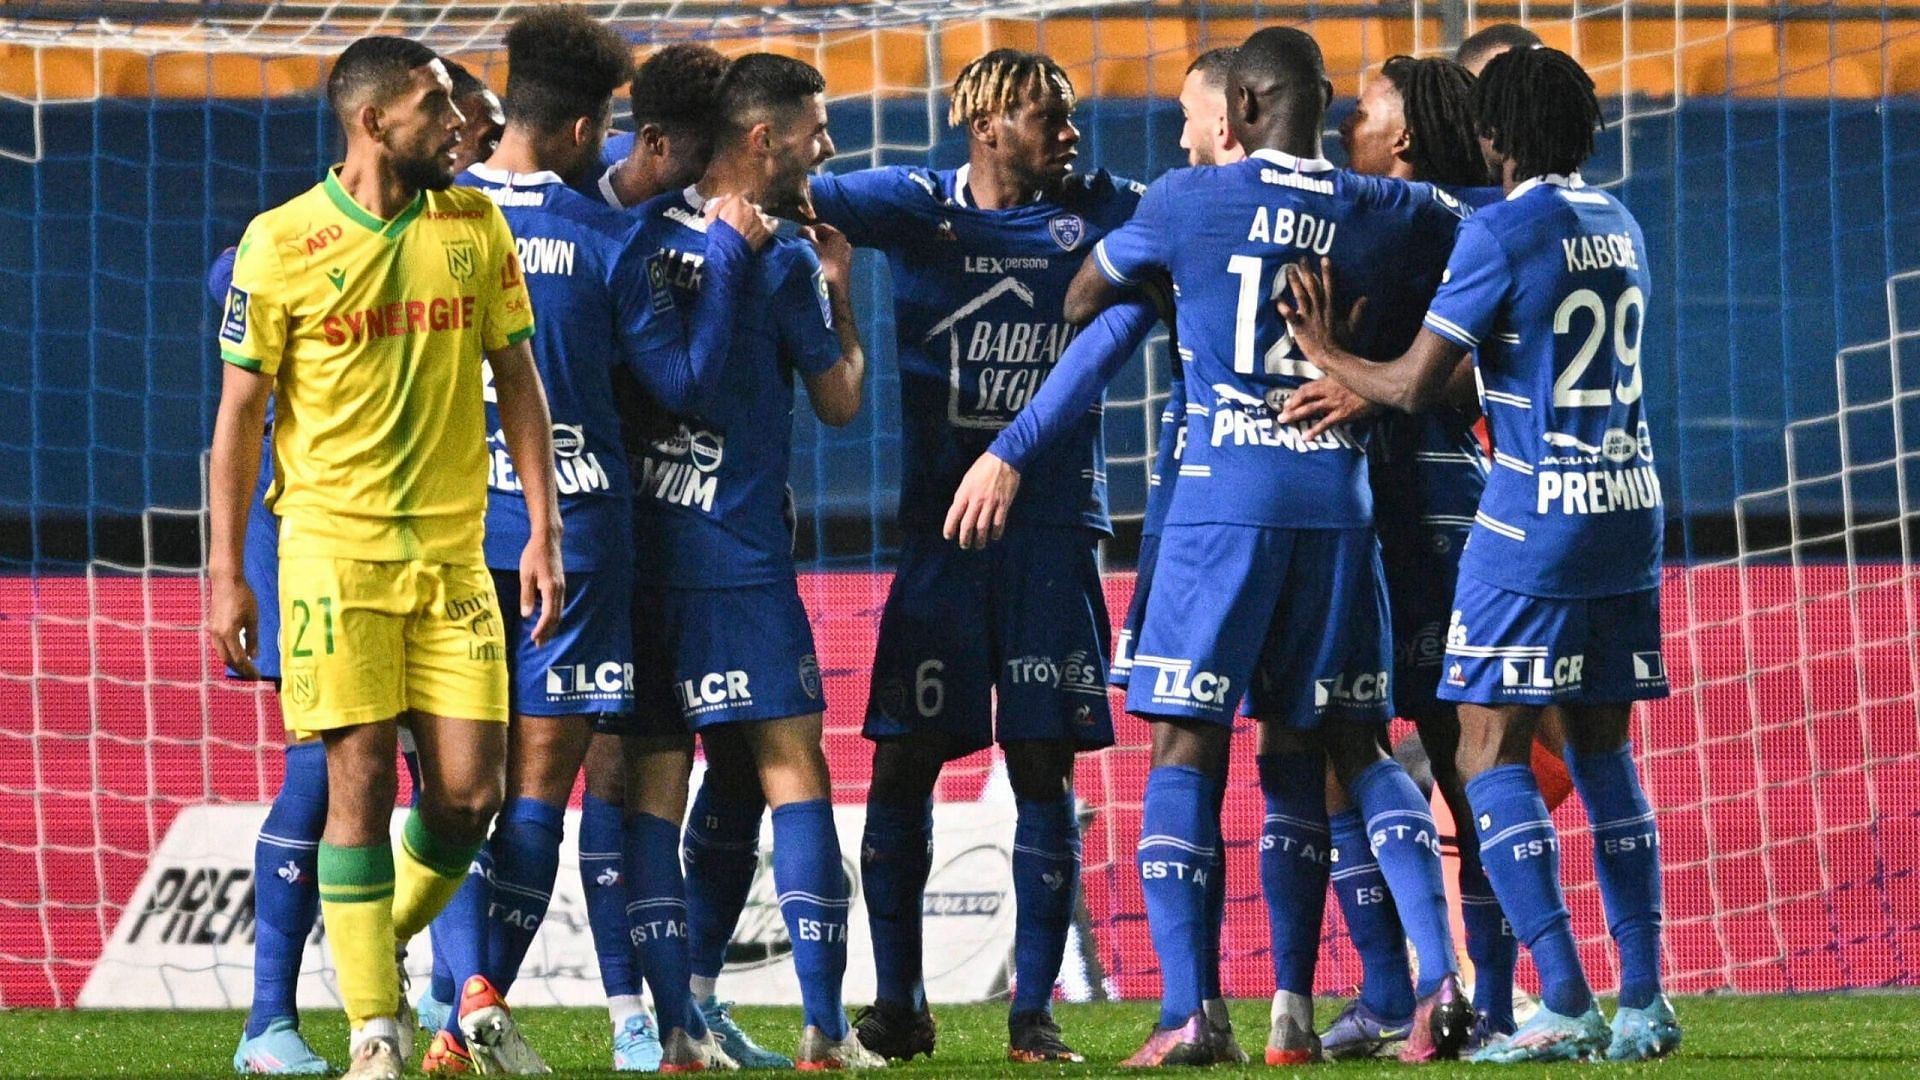 Can Troyes pick up some valuable points against Reims this weekend?